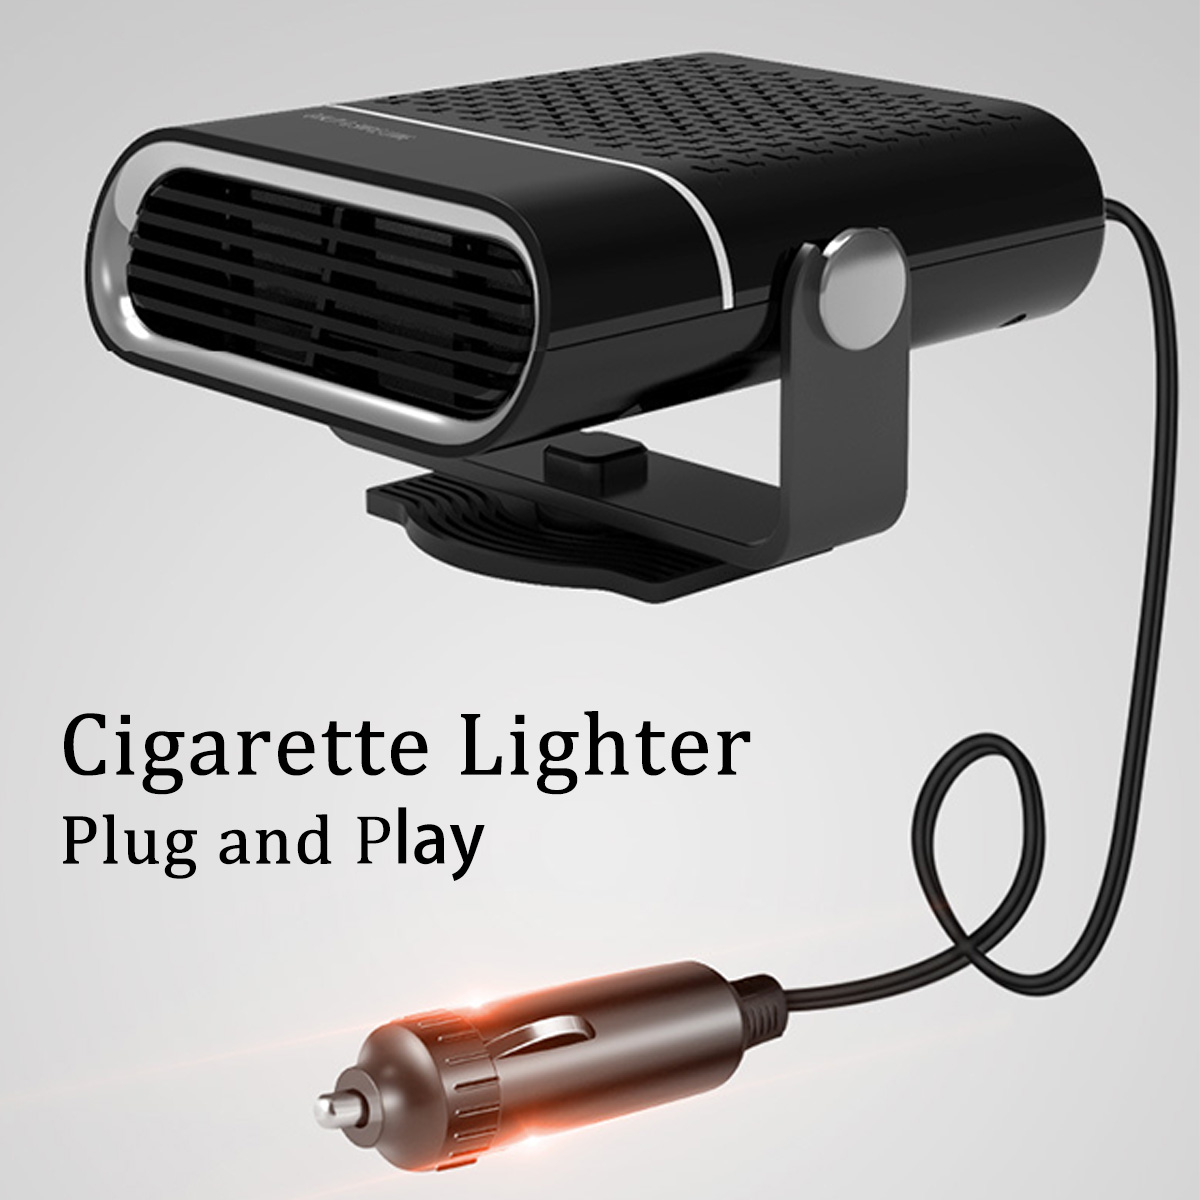 Portable-Car-Heater-Fast-Heating-Fan-360-Degree-Rotary-Winter-Defroster-Demisting-Air-Purification-1-1773296-4